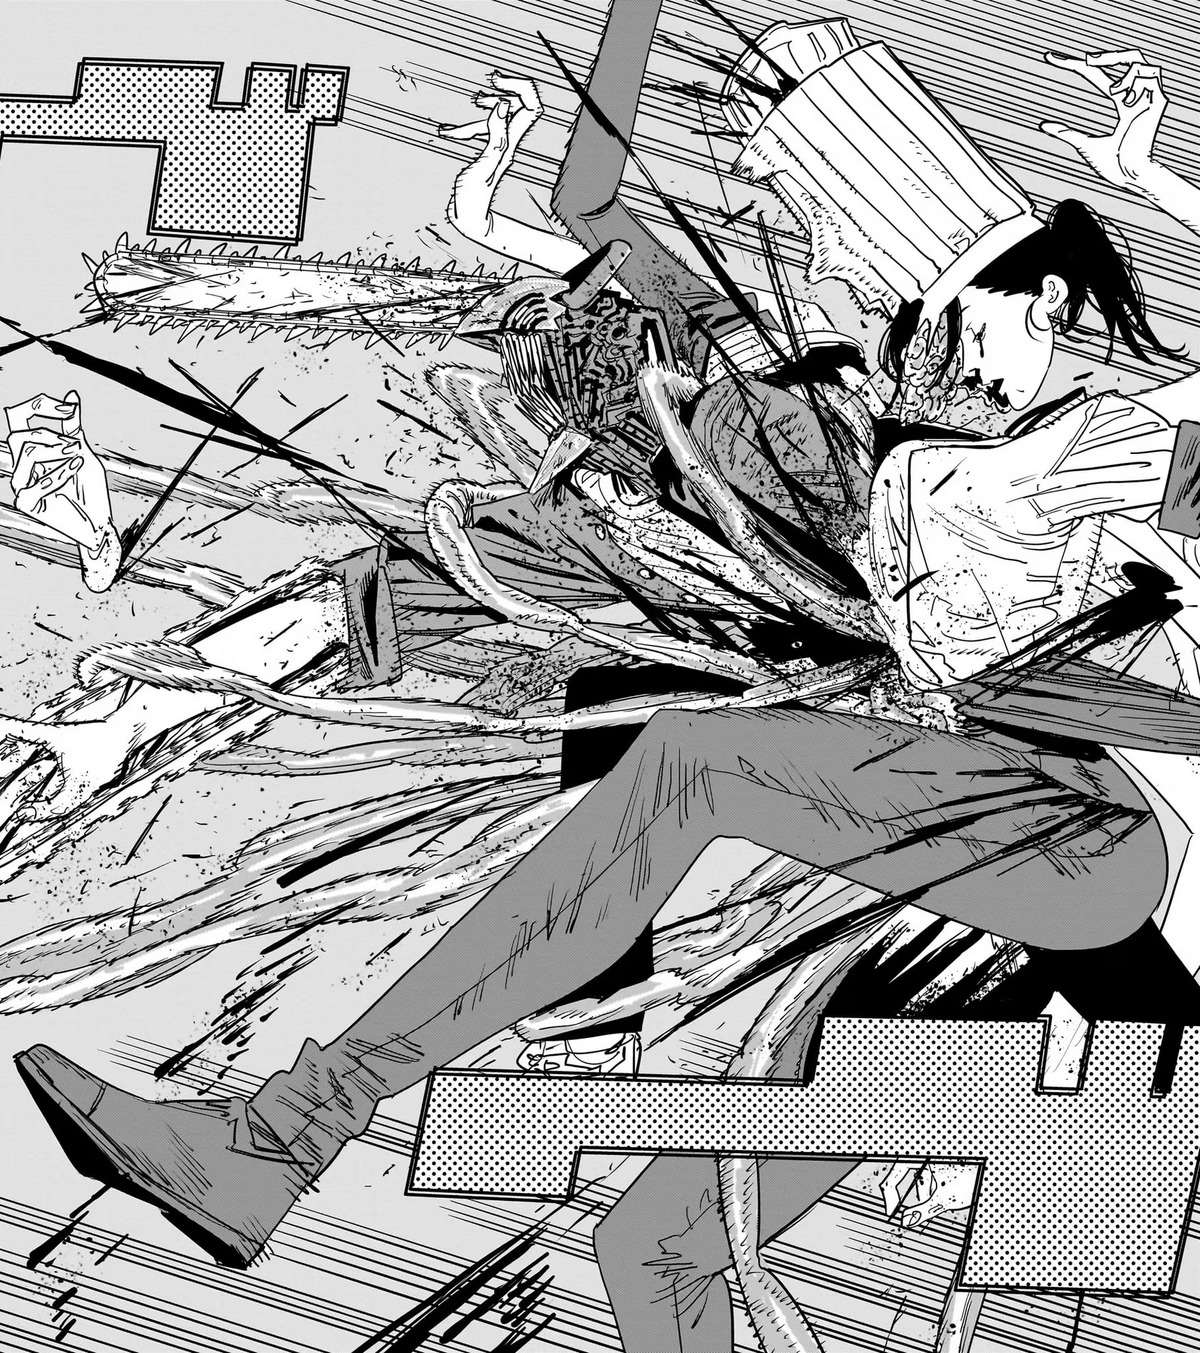 Chainsaw Man Sparks Its Brutal Take on a Training Arc